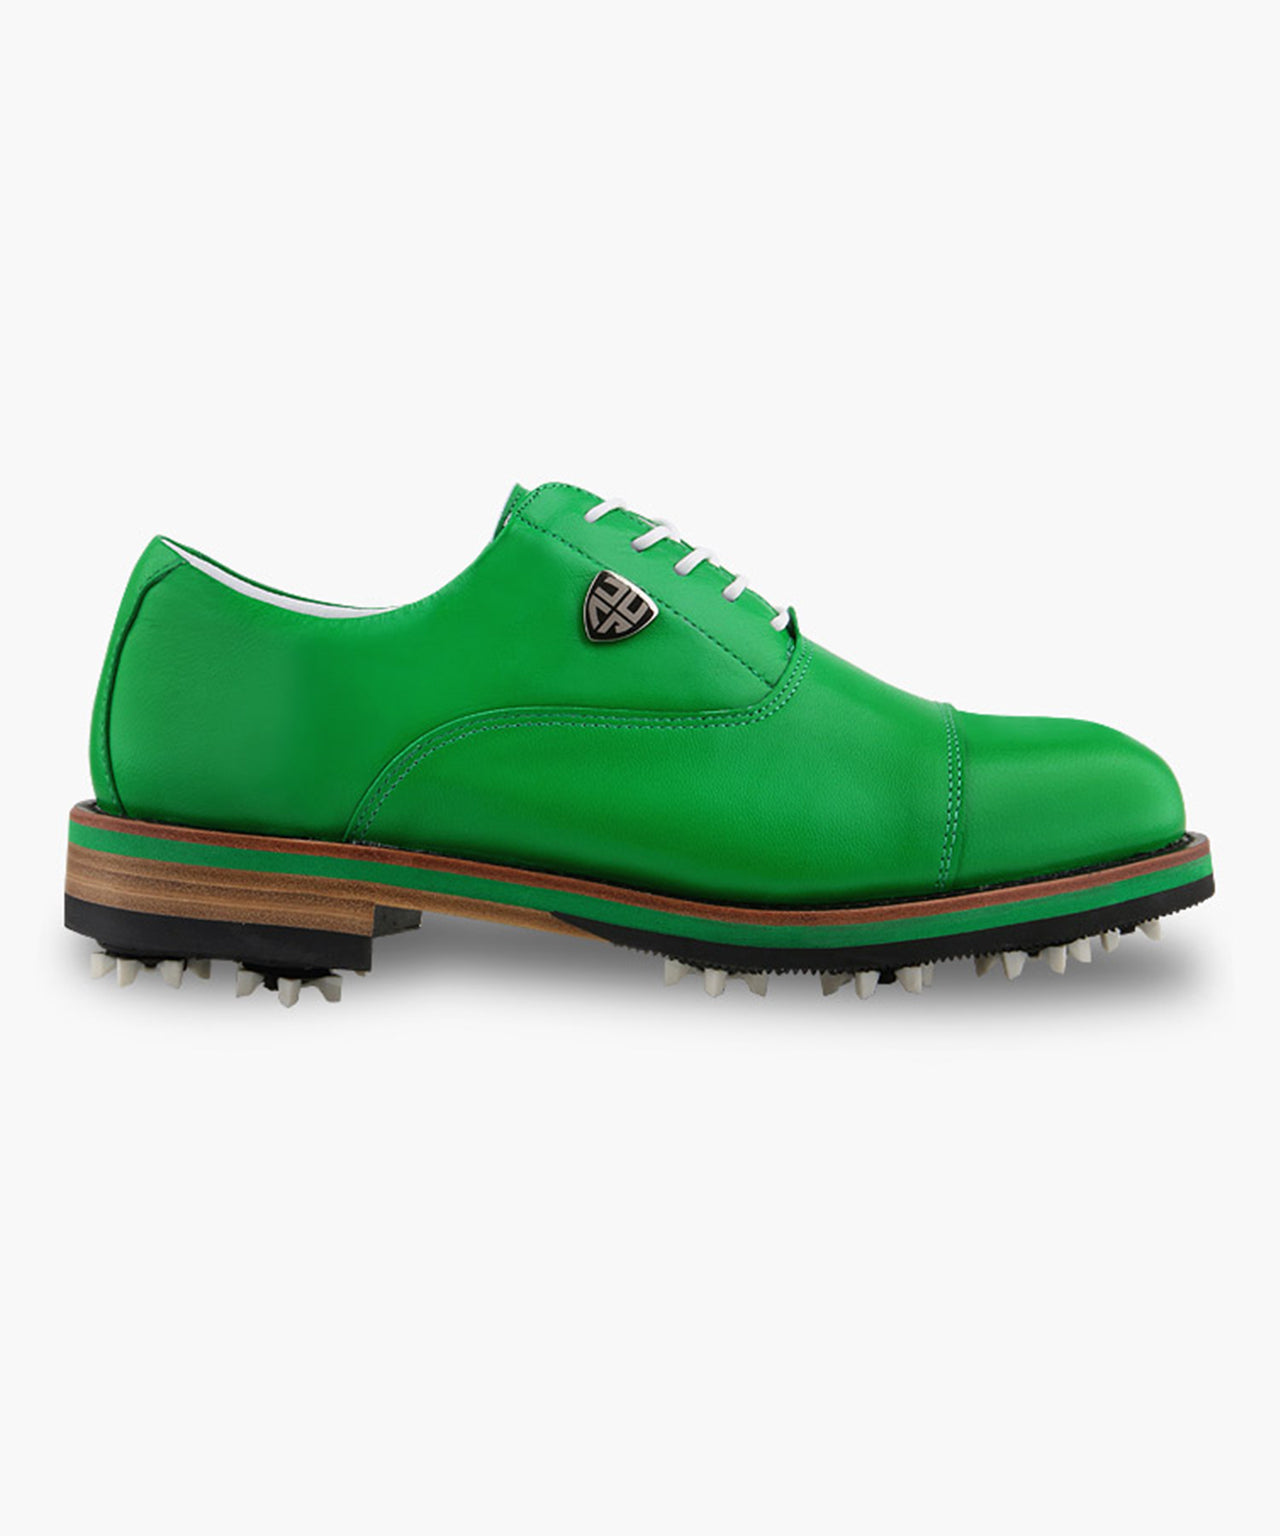 HENRY STUART Icon Classic Spike Golf Shoes - Green